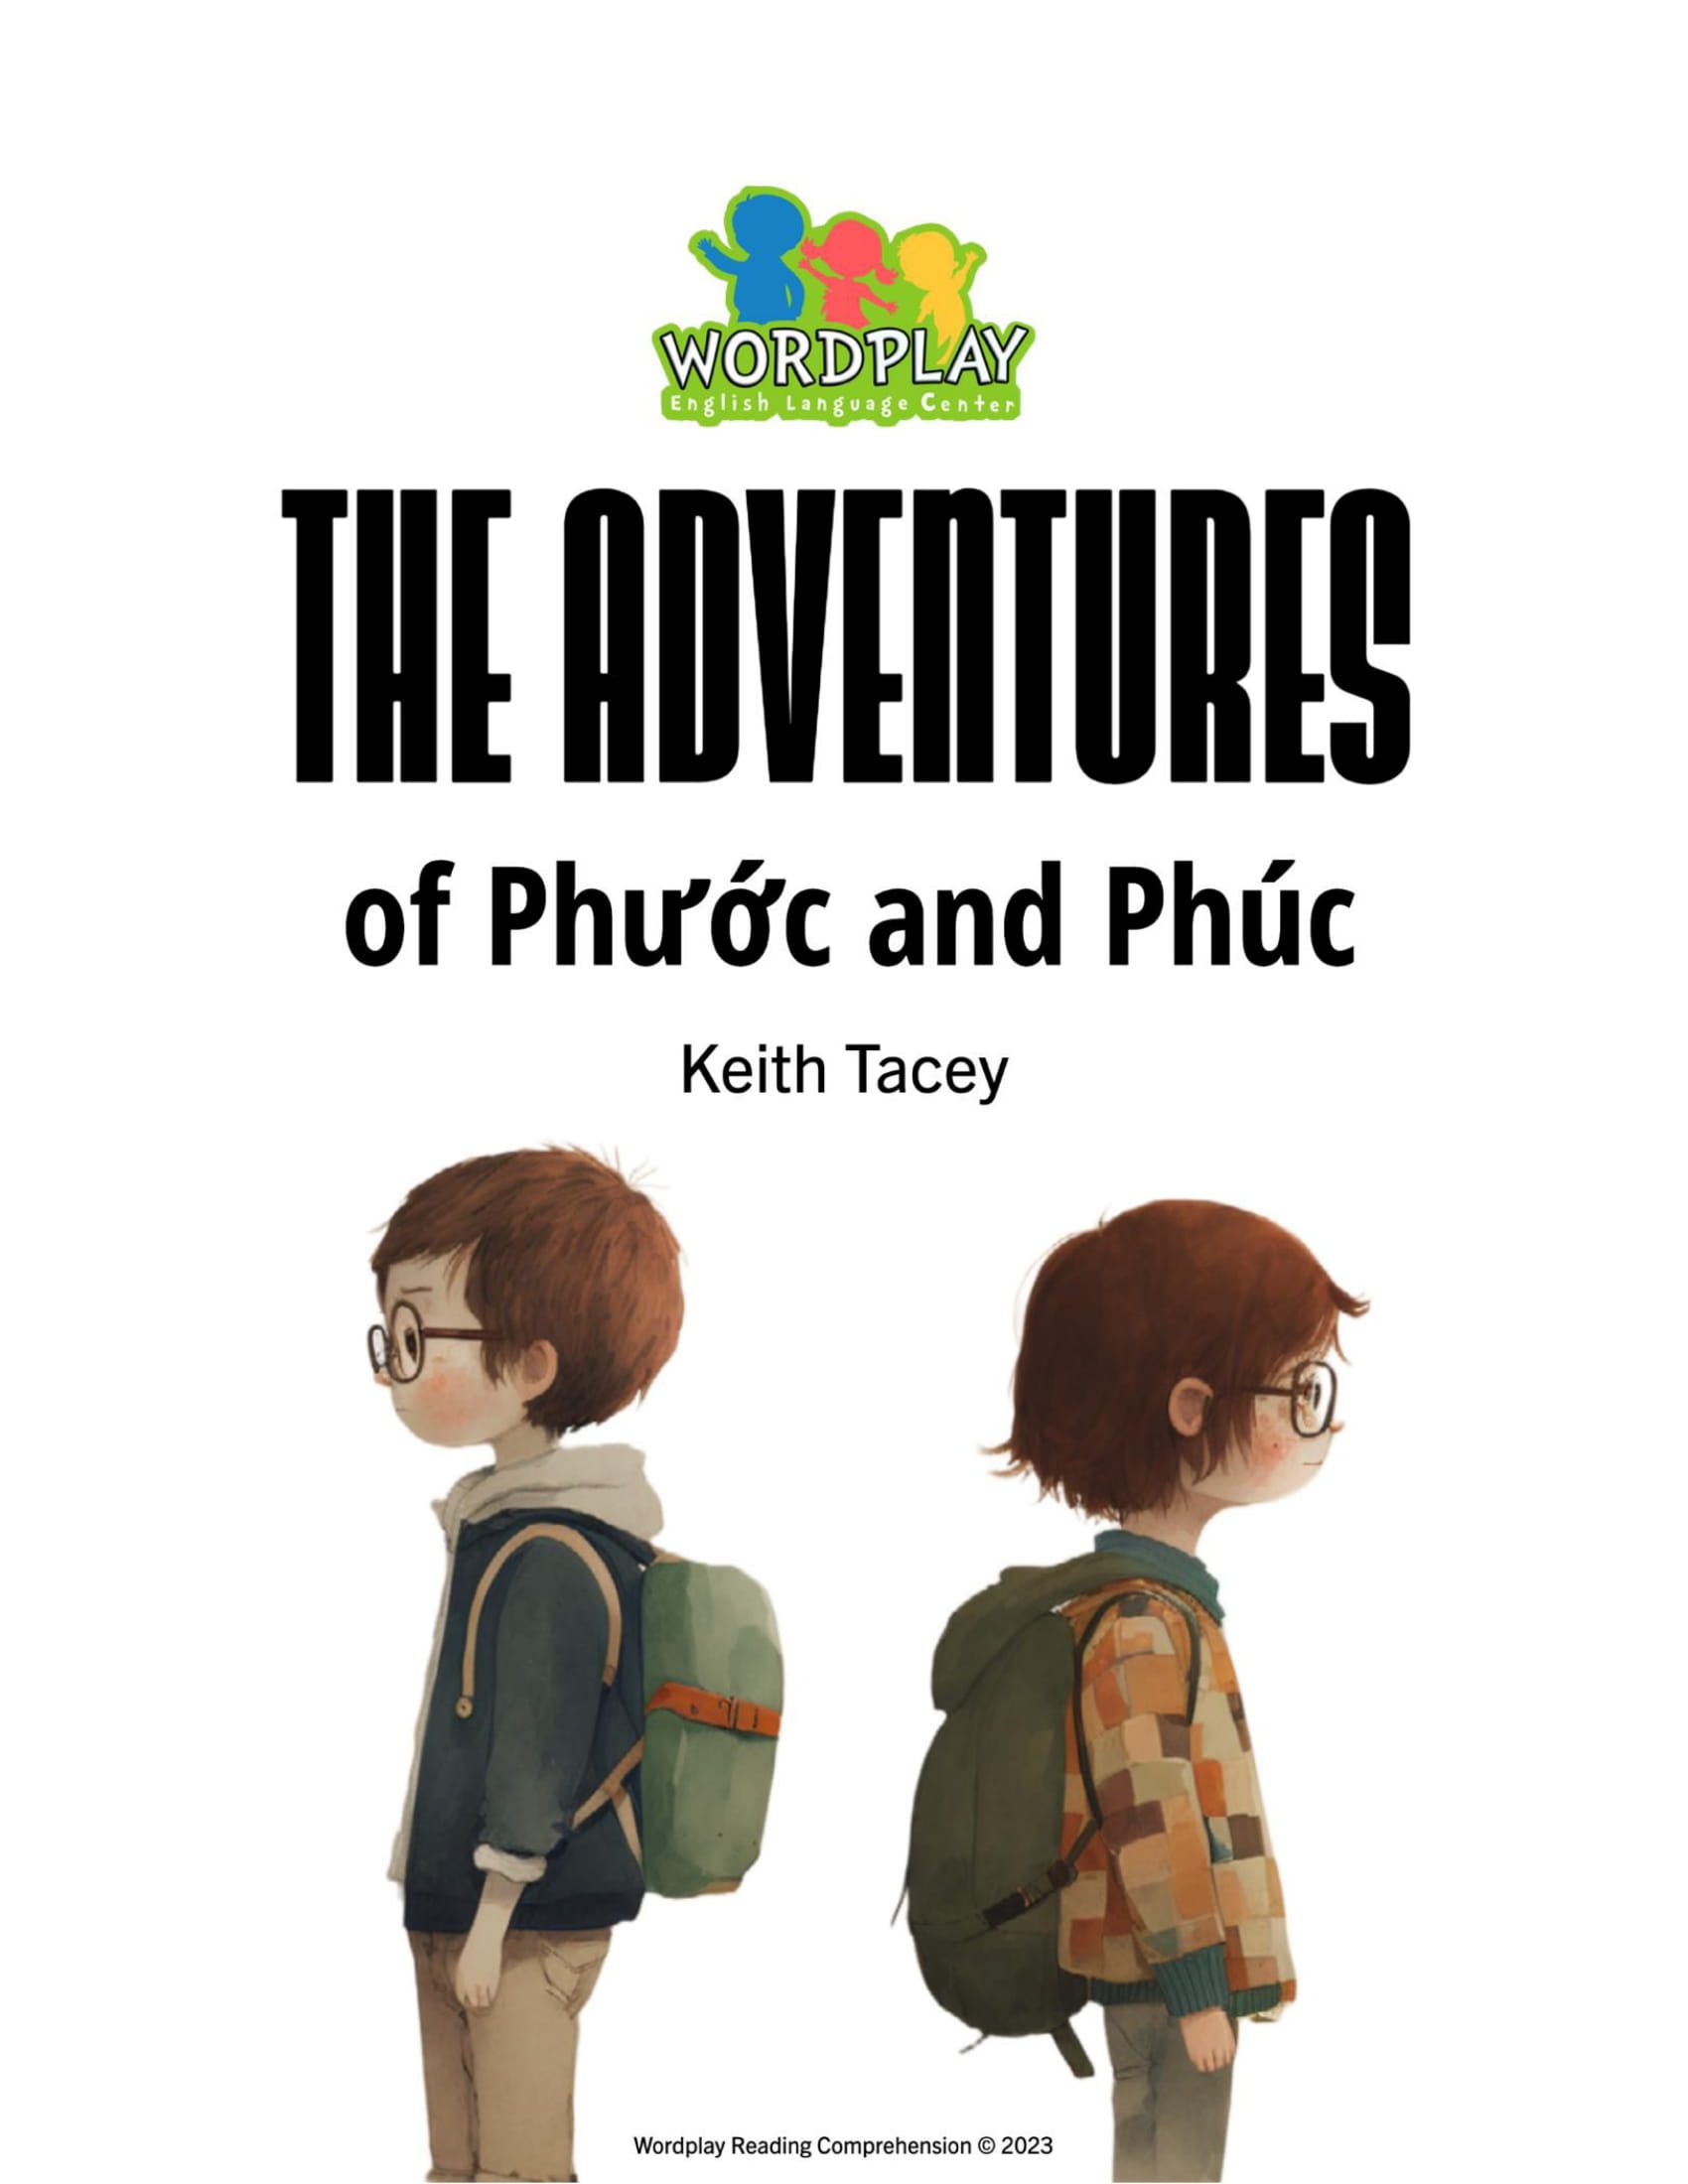 The adventures of Phuoc and Phuc-1